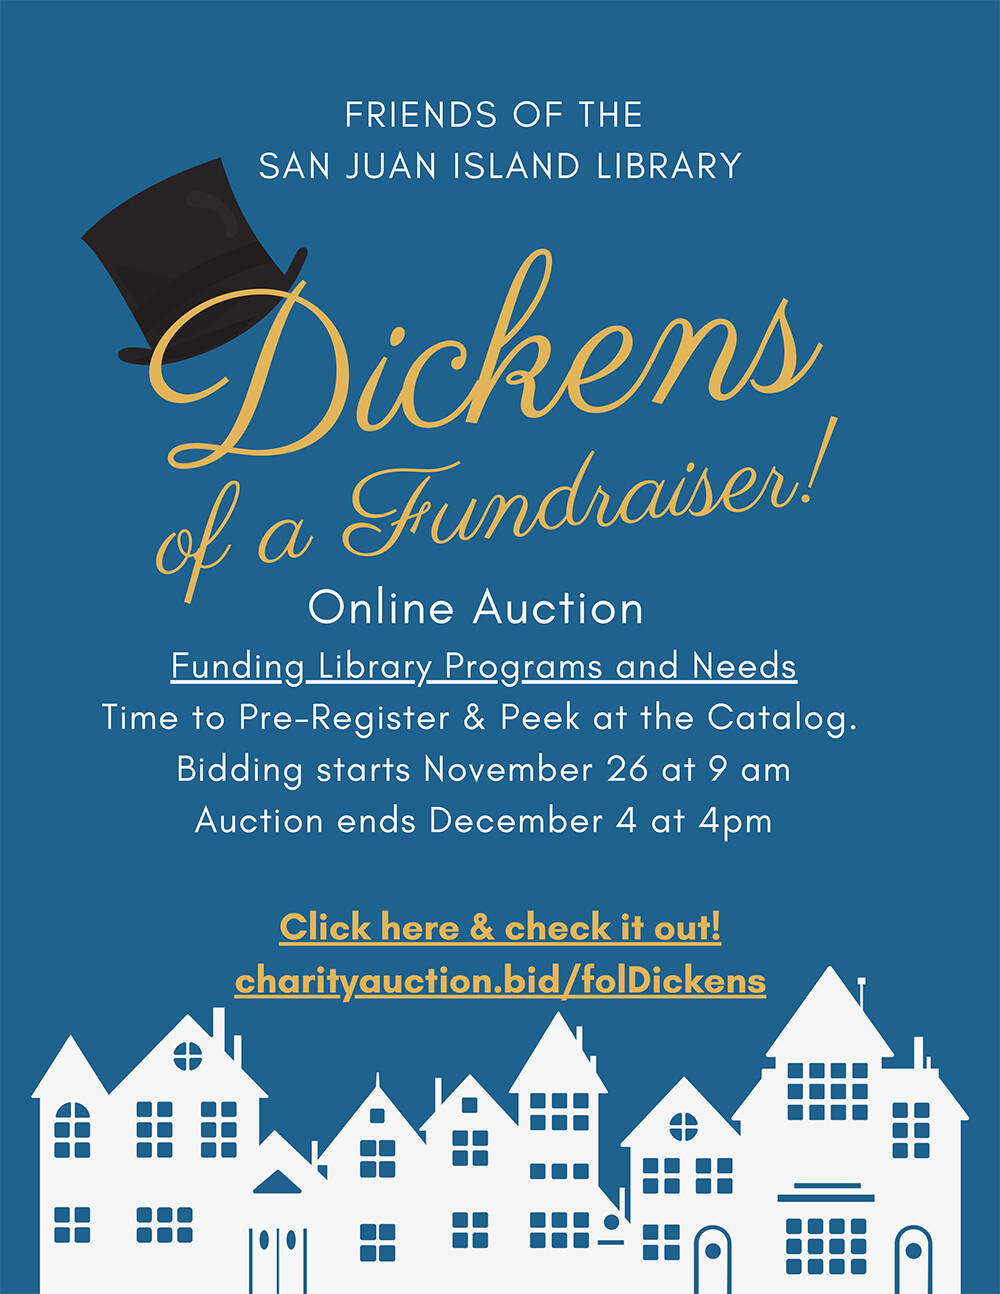 Dickens of a Fundraiser!